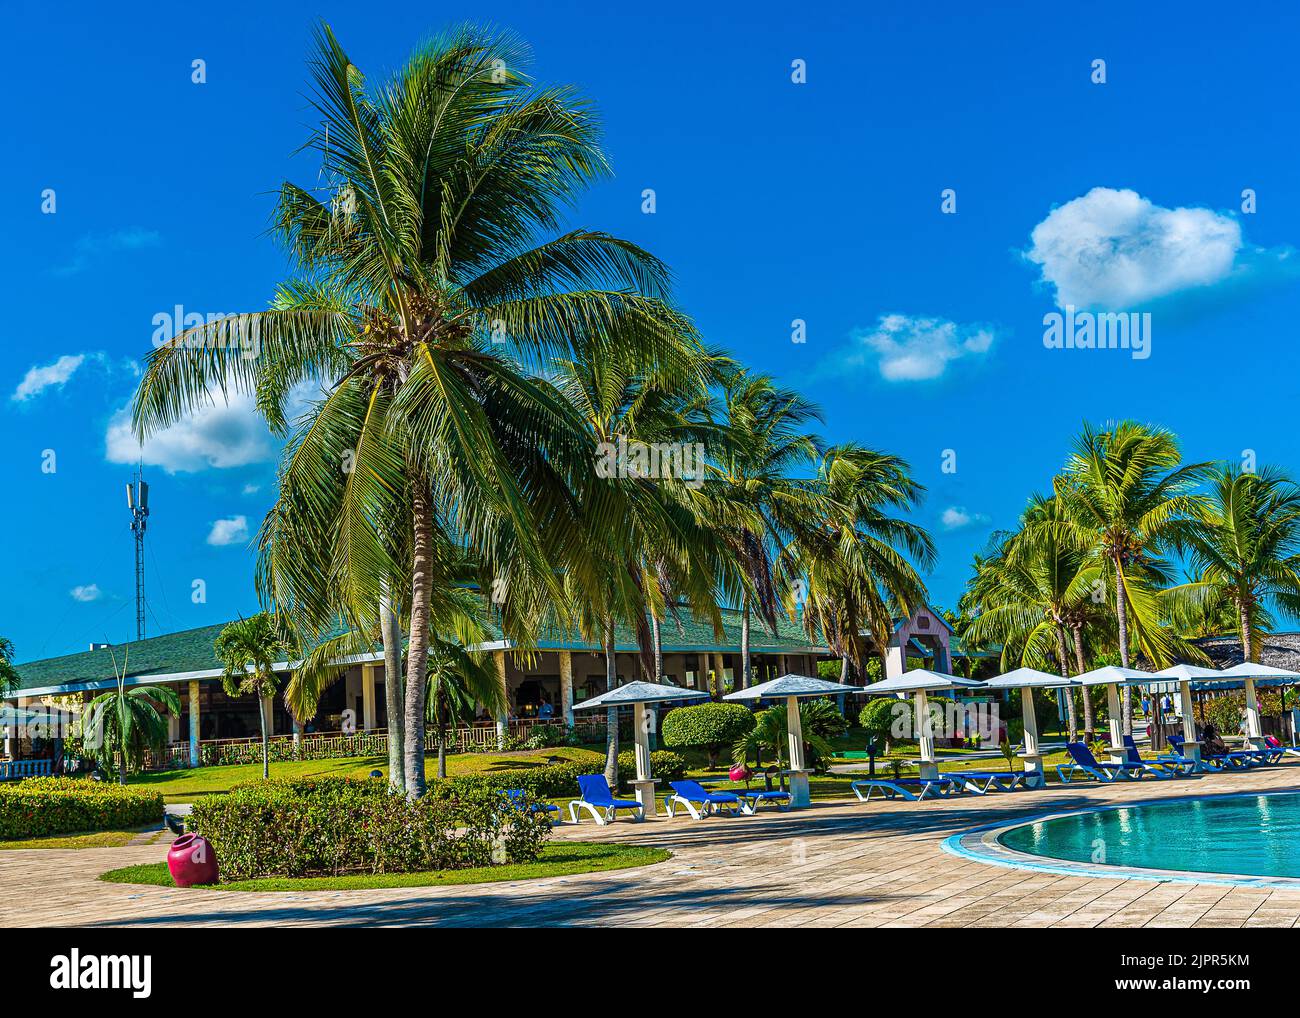 Holidays in one of the resorts near Holguin, Cuba, with a beautiful sandy beach surrounded by palm trees and warm ocean waves. Stock Photo